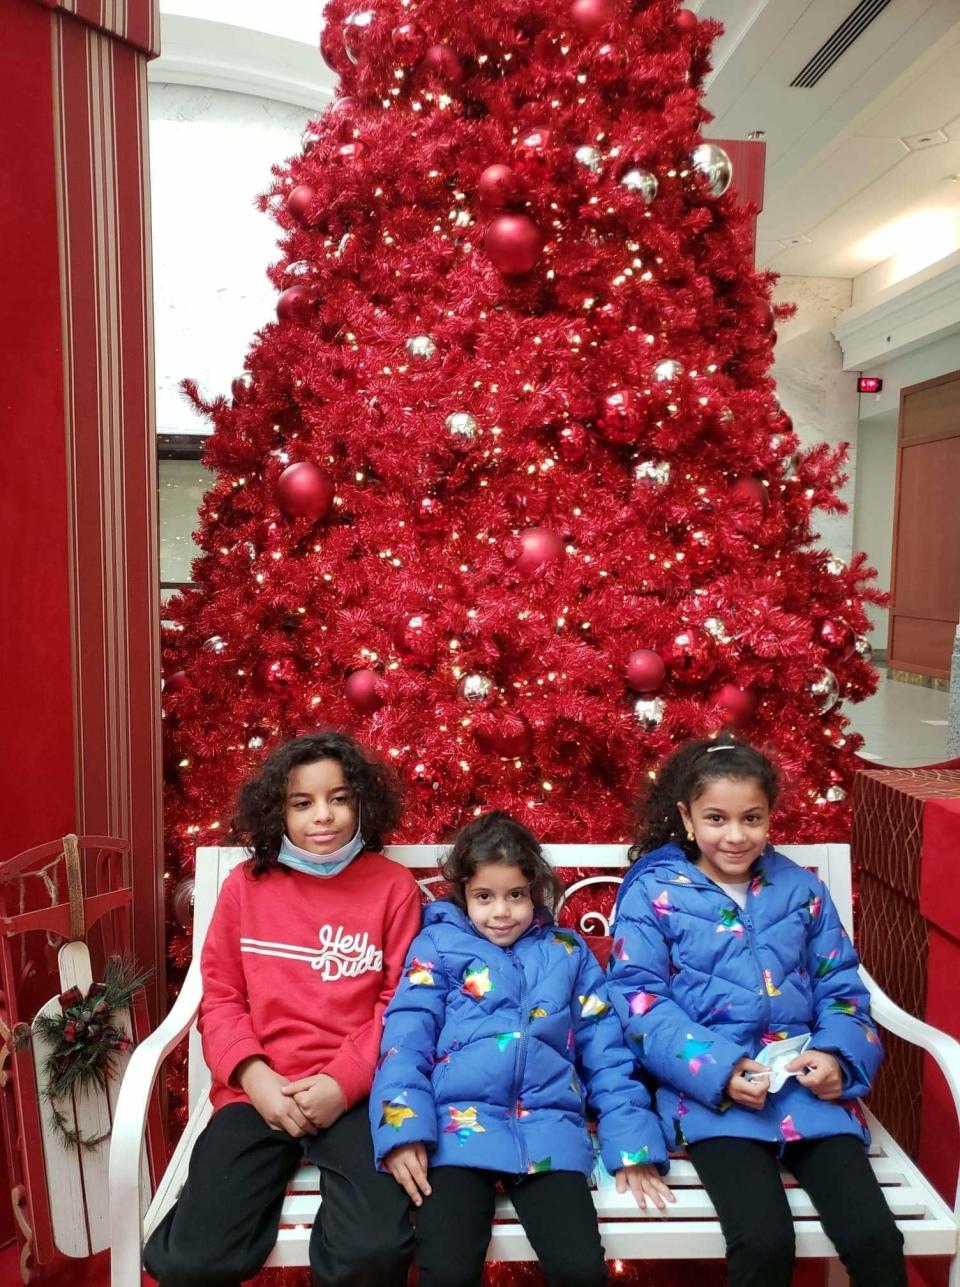 Mohammed, Judy, and Rodina Abdelrhman of Mount Holly visit a Christmas display at Moorestown Mall. Last year they received new clothes to replace hand-me-downs thanks to the Give A Christmas program sponsored by the Burlington County Times and the New Jersey 211 help line for social services